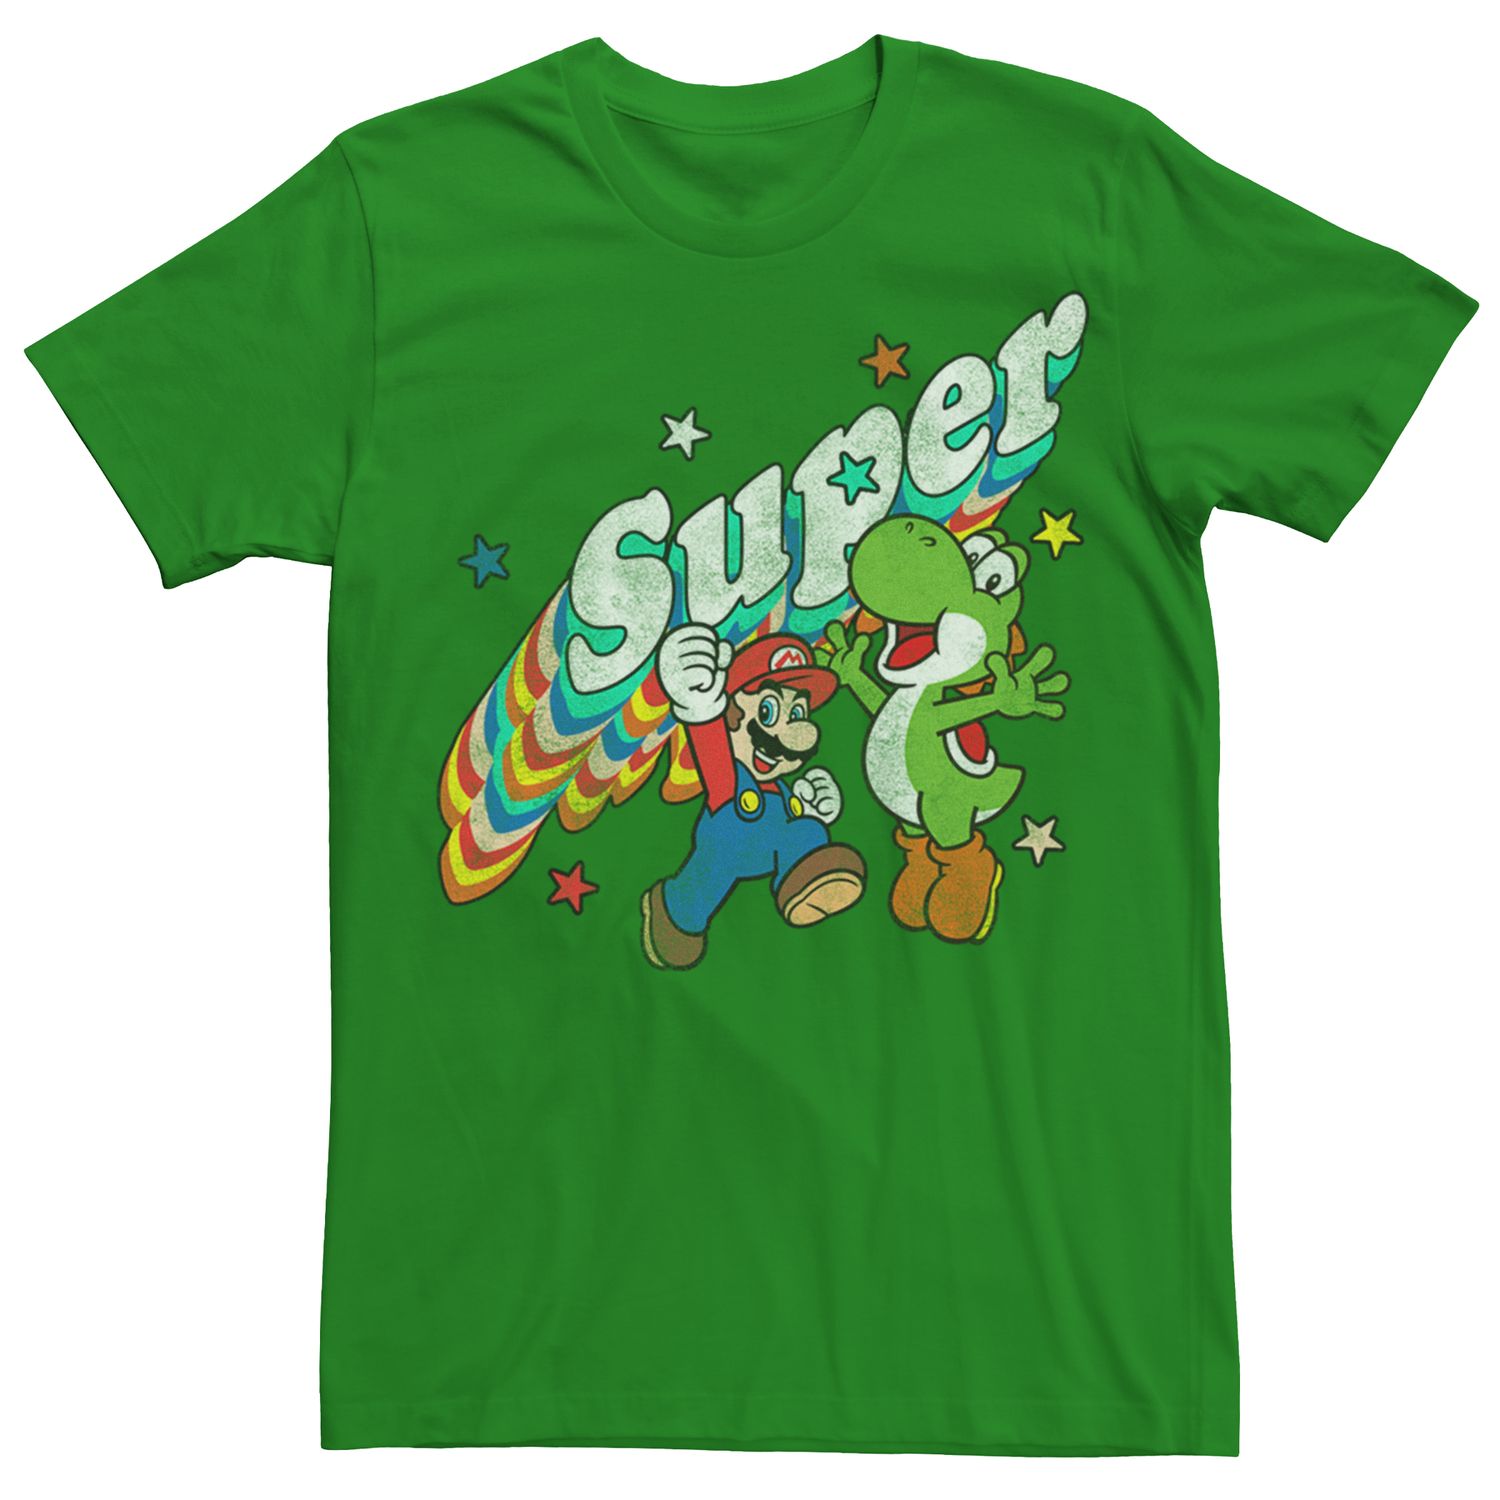 Image for Licensed Character Men's Nintendo Super Mario Brothers & Yoshi Graphic Tee at Kohl's.